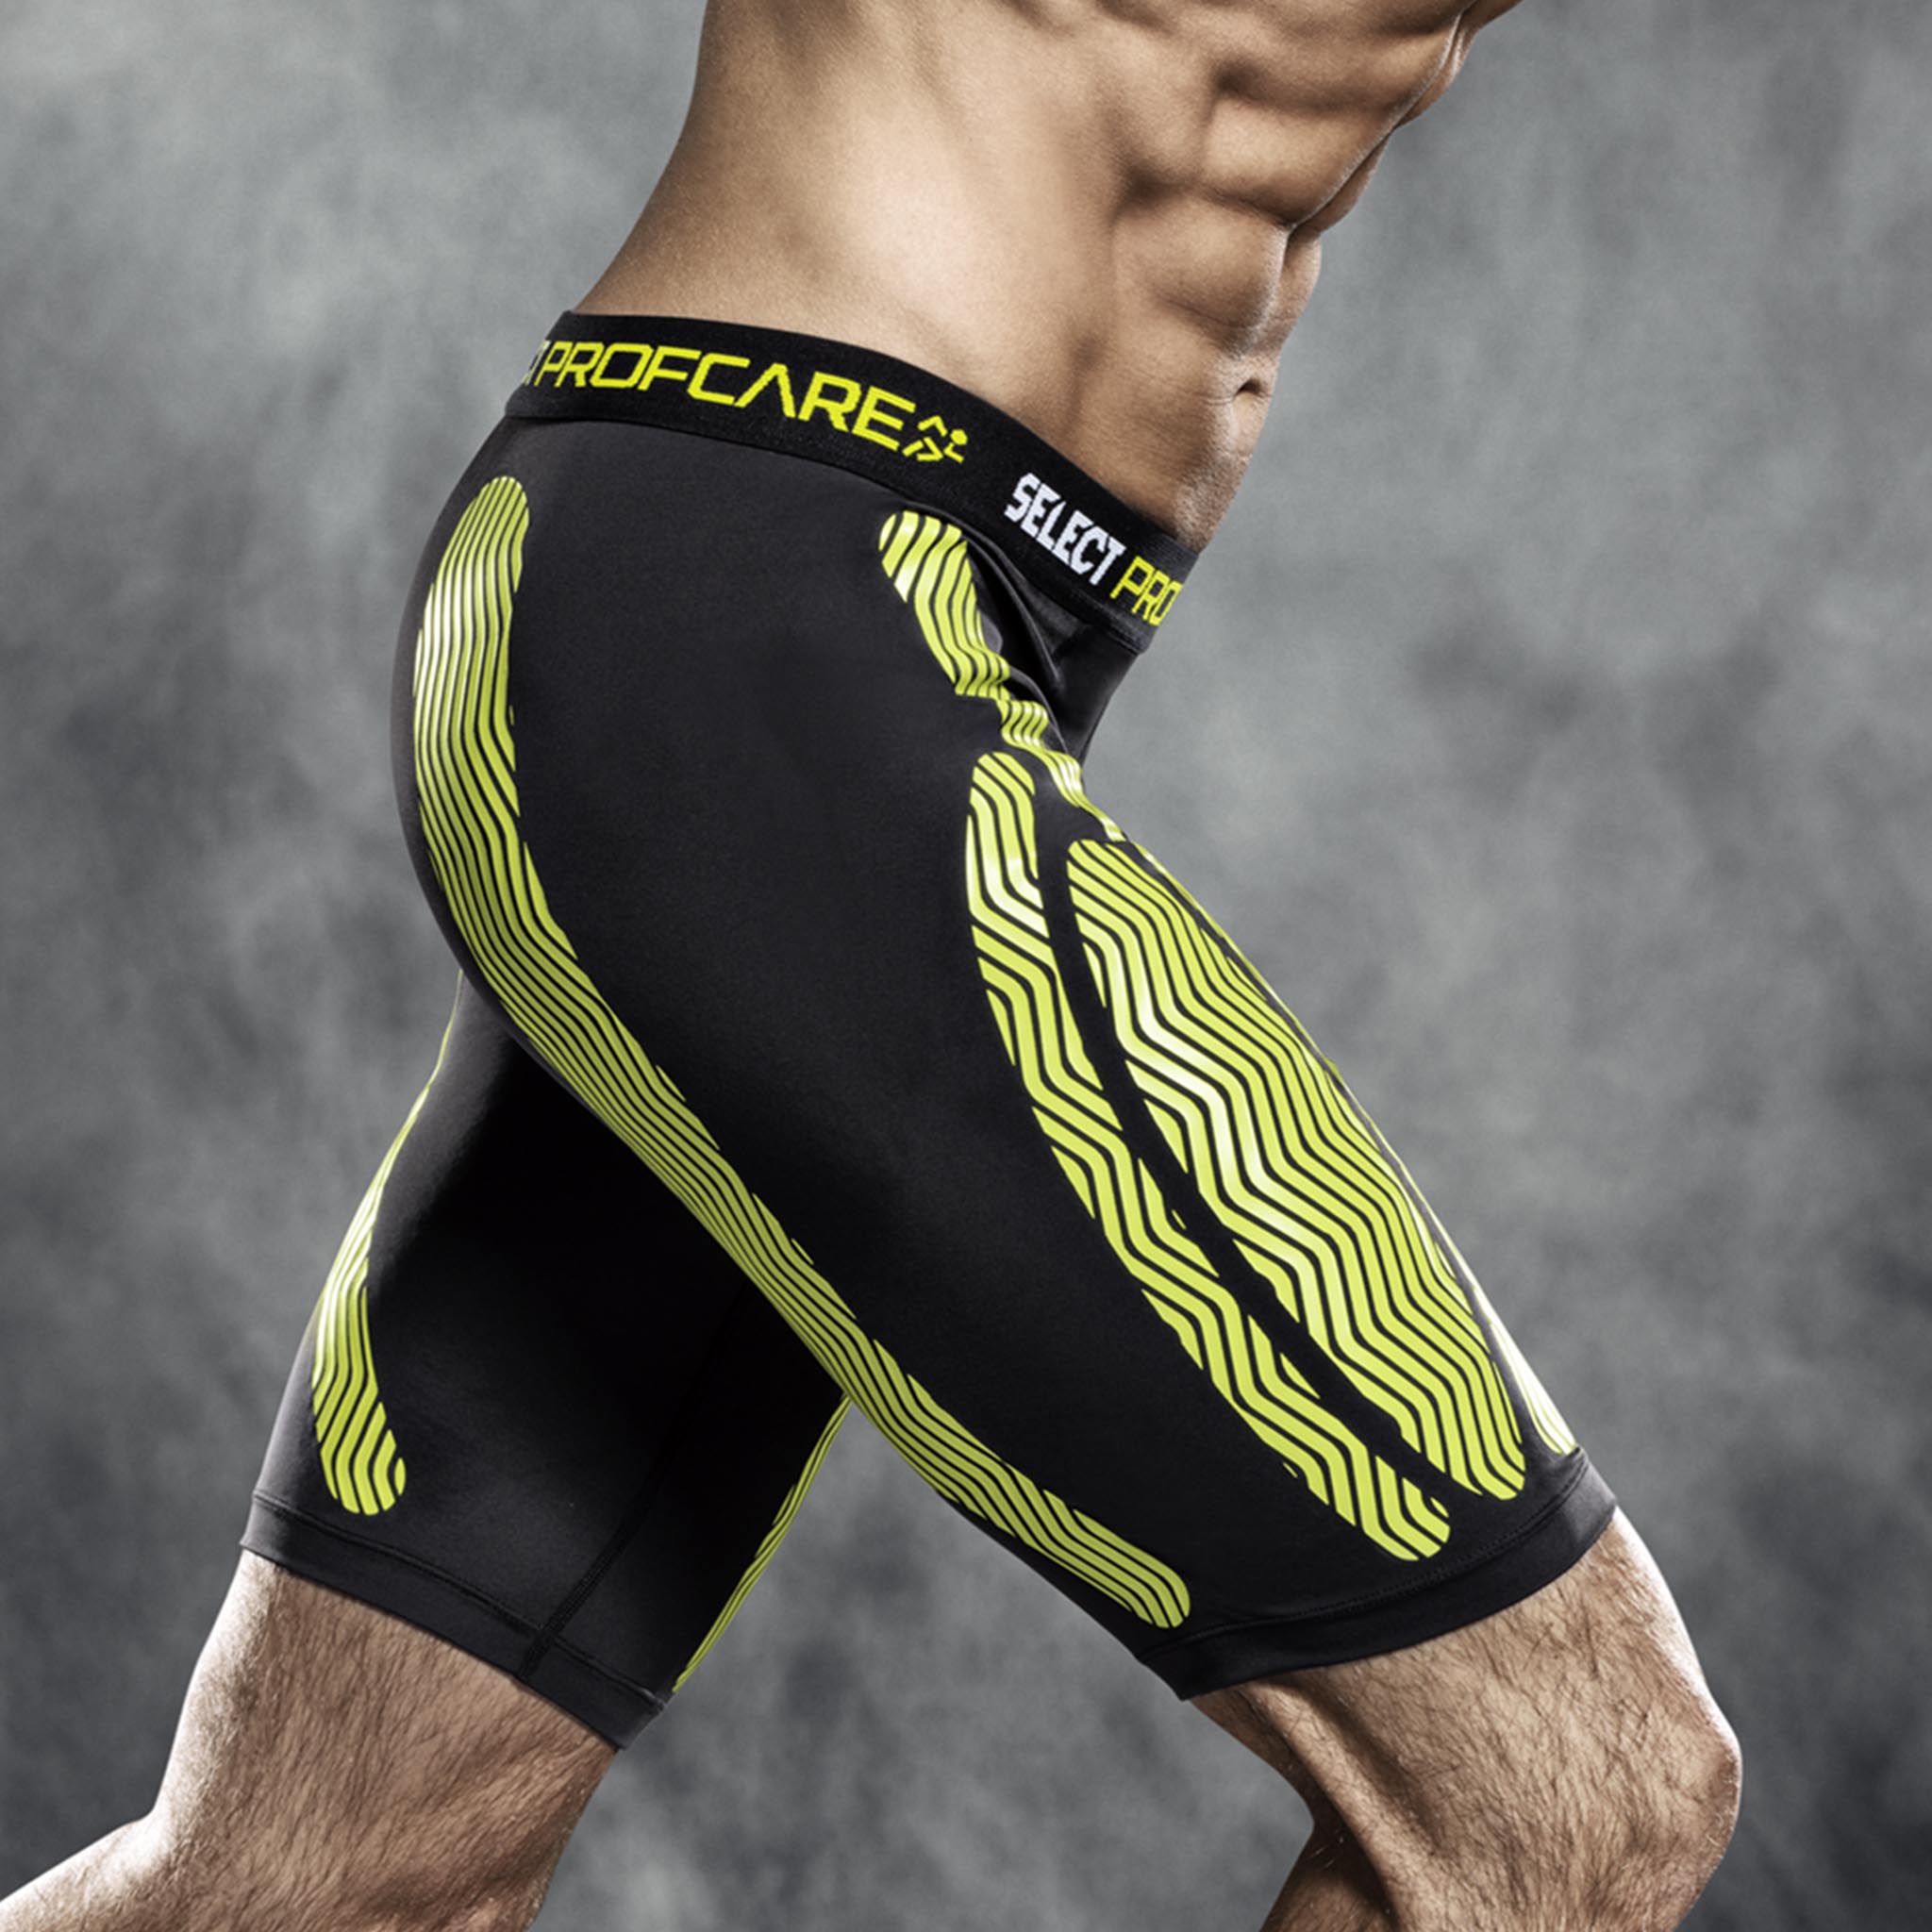 ACE Brand Compression Short and Cup, Youth, S/M, Ideal for Football